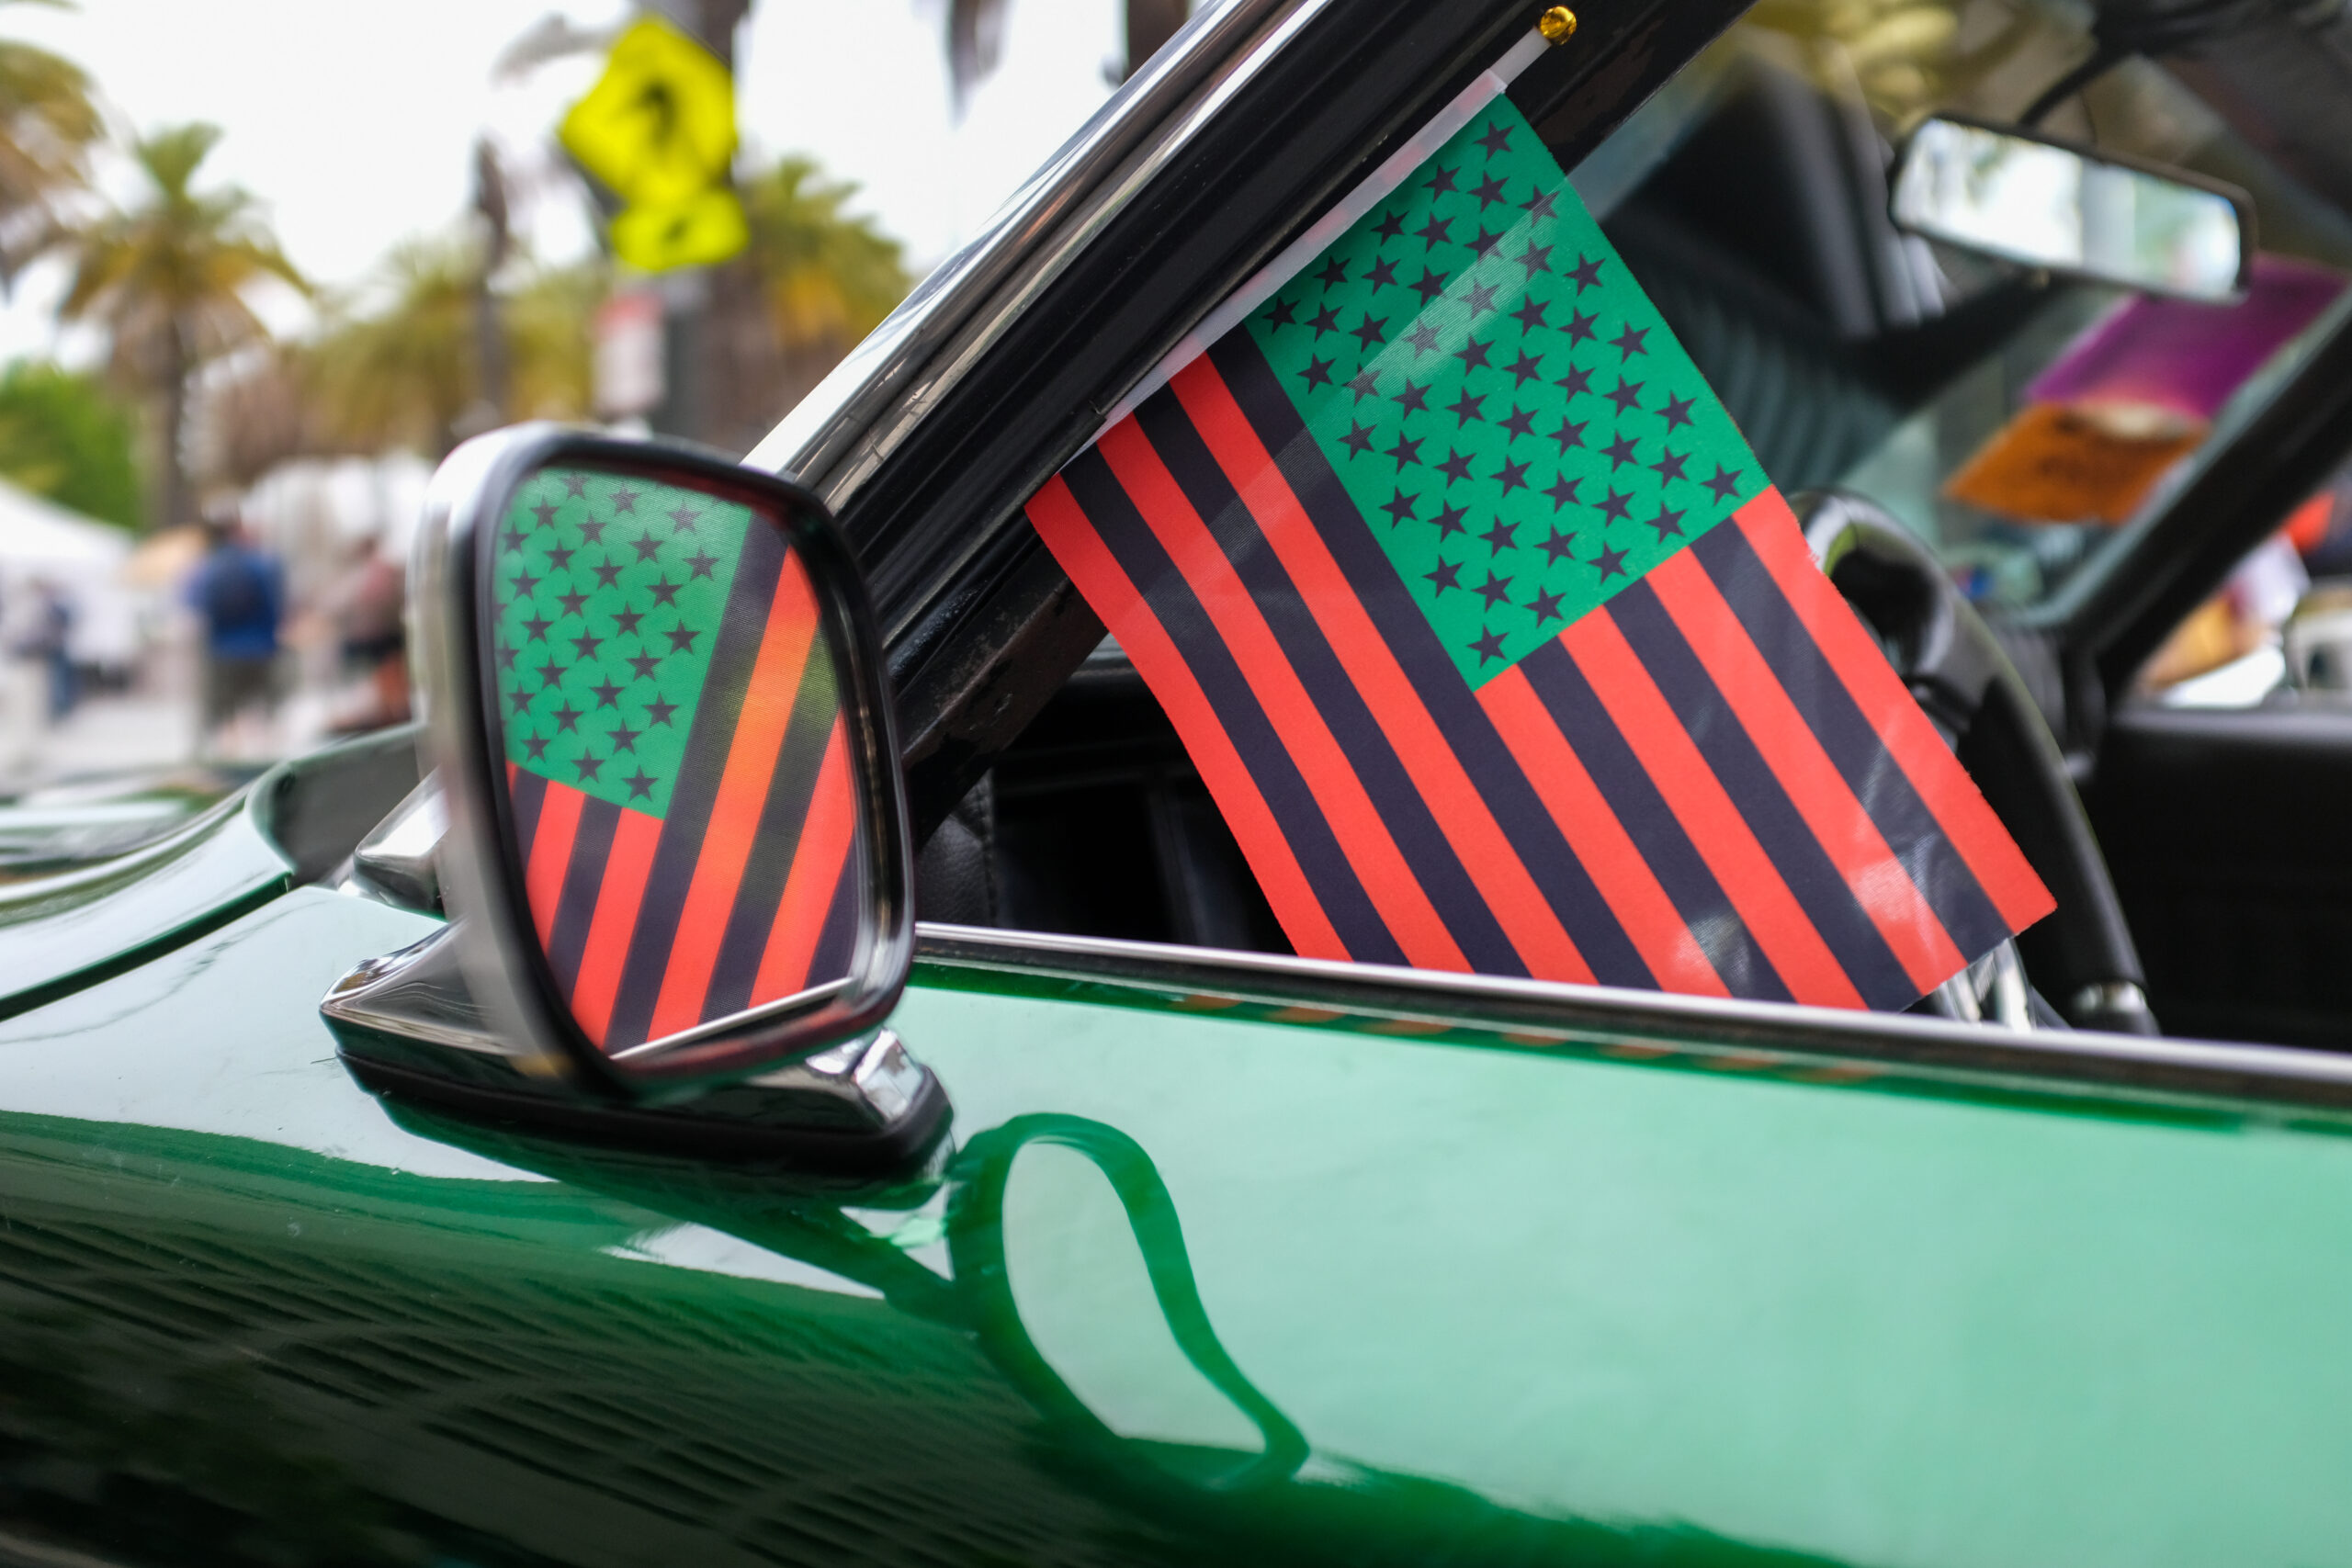 A car mirror reflects a U.S. flag with an alternative design featuring black and red stripes and a green starfield.